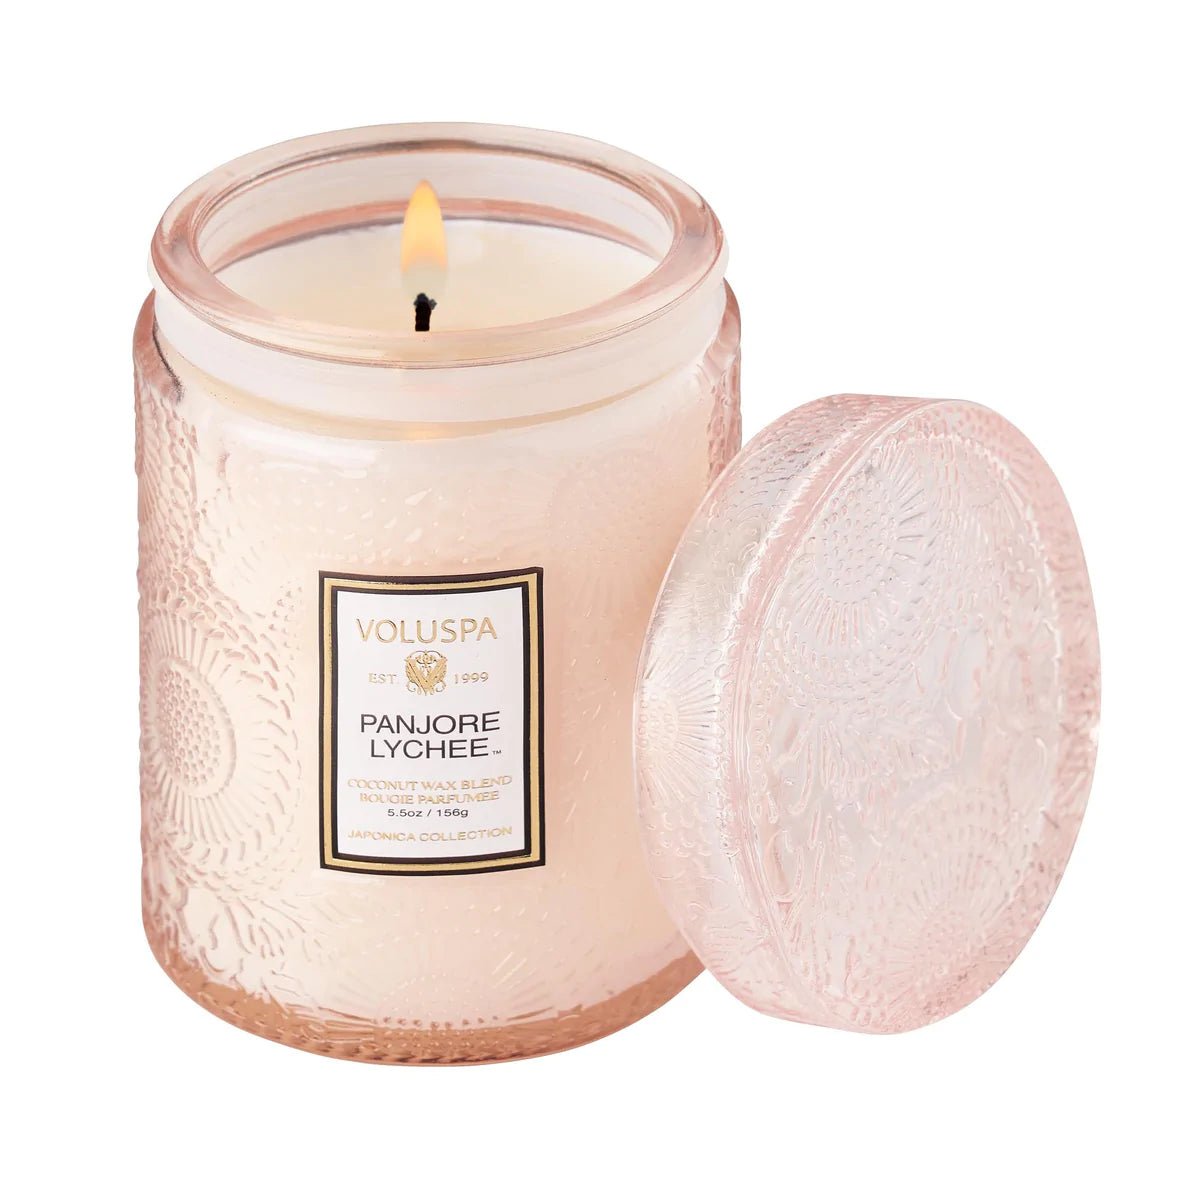 Panjore Lychee -Small Jar Candle